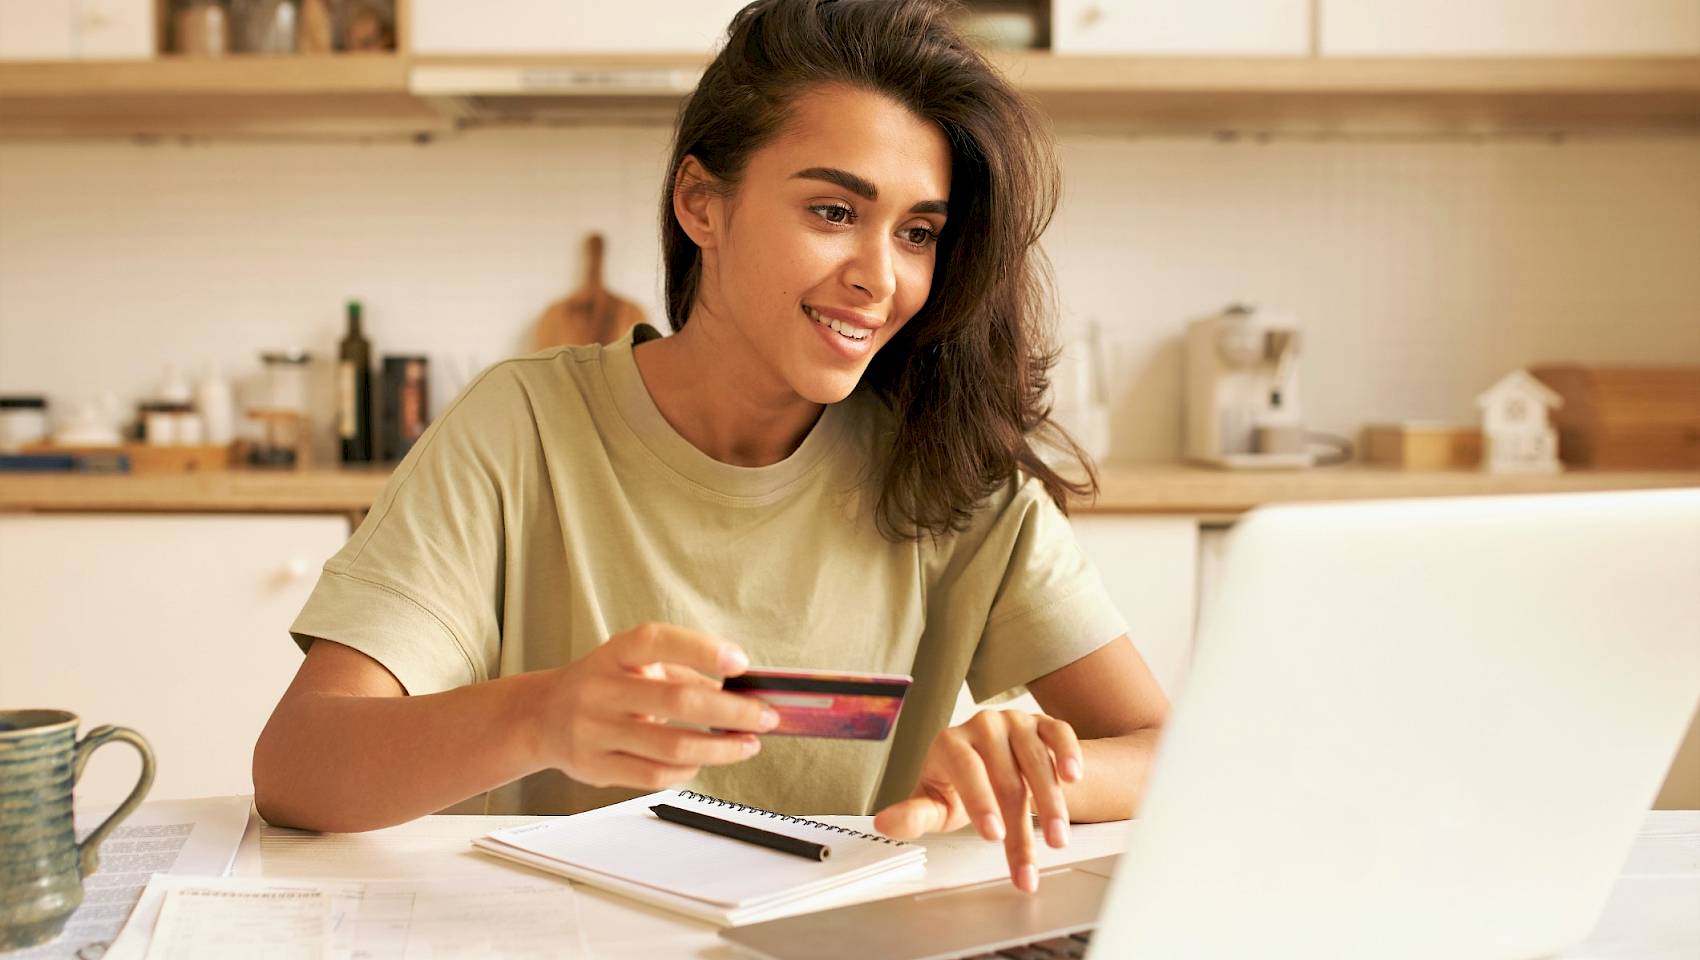 Young female making a puchase via laptop and inputting credit card details